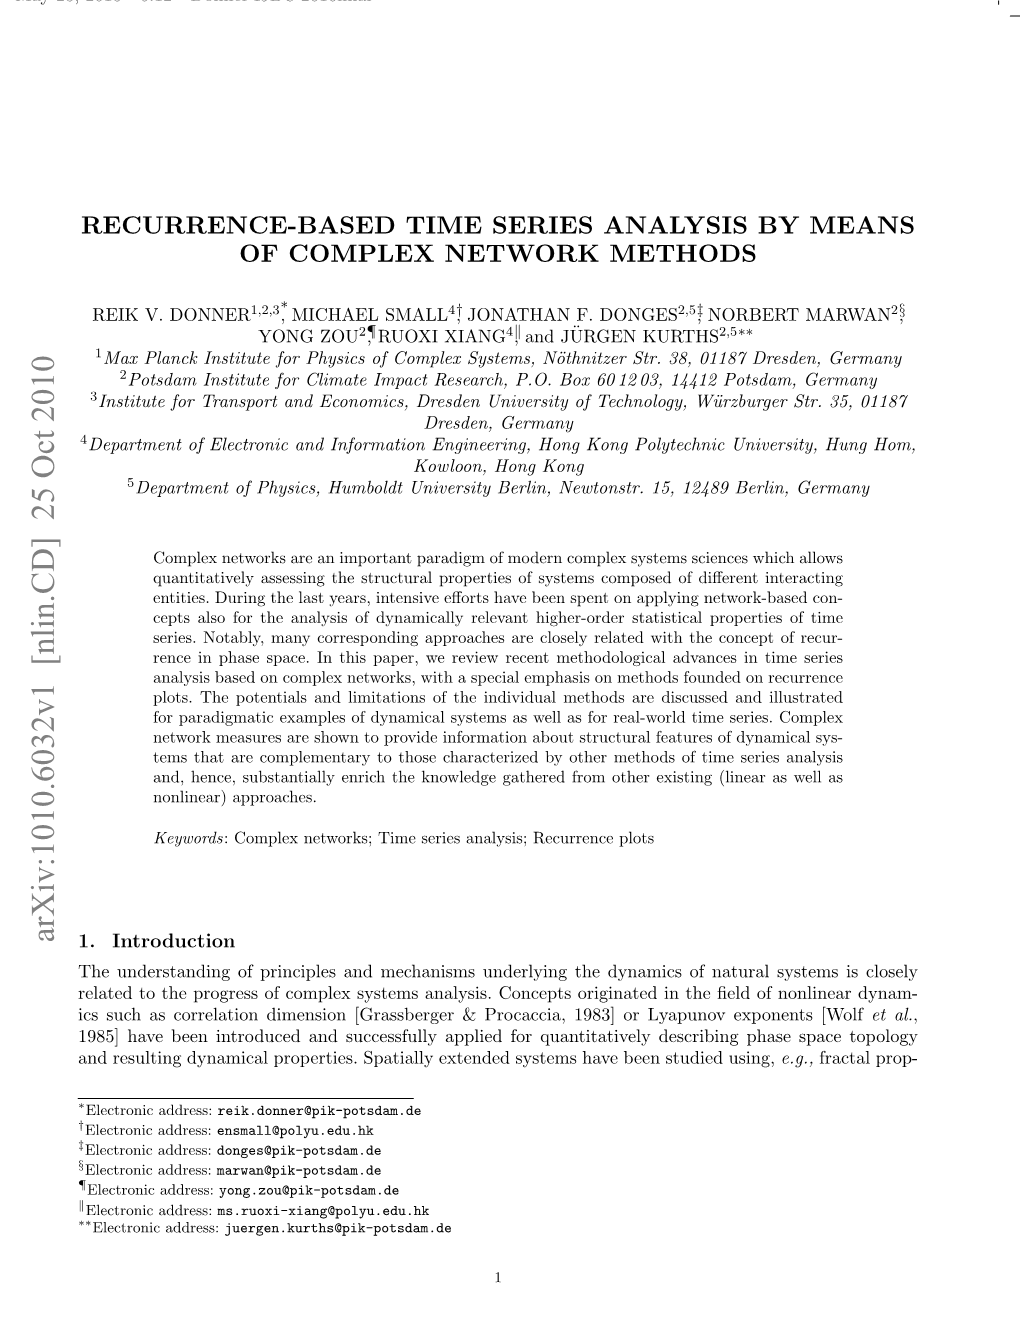 Recurrence-Based Time Series Analysis by Means of Complex Network Methods